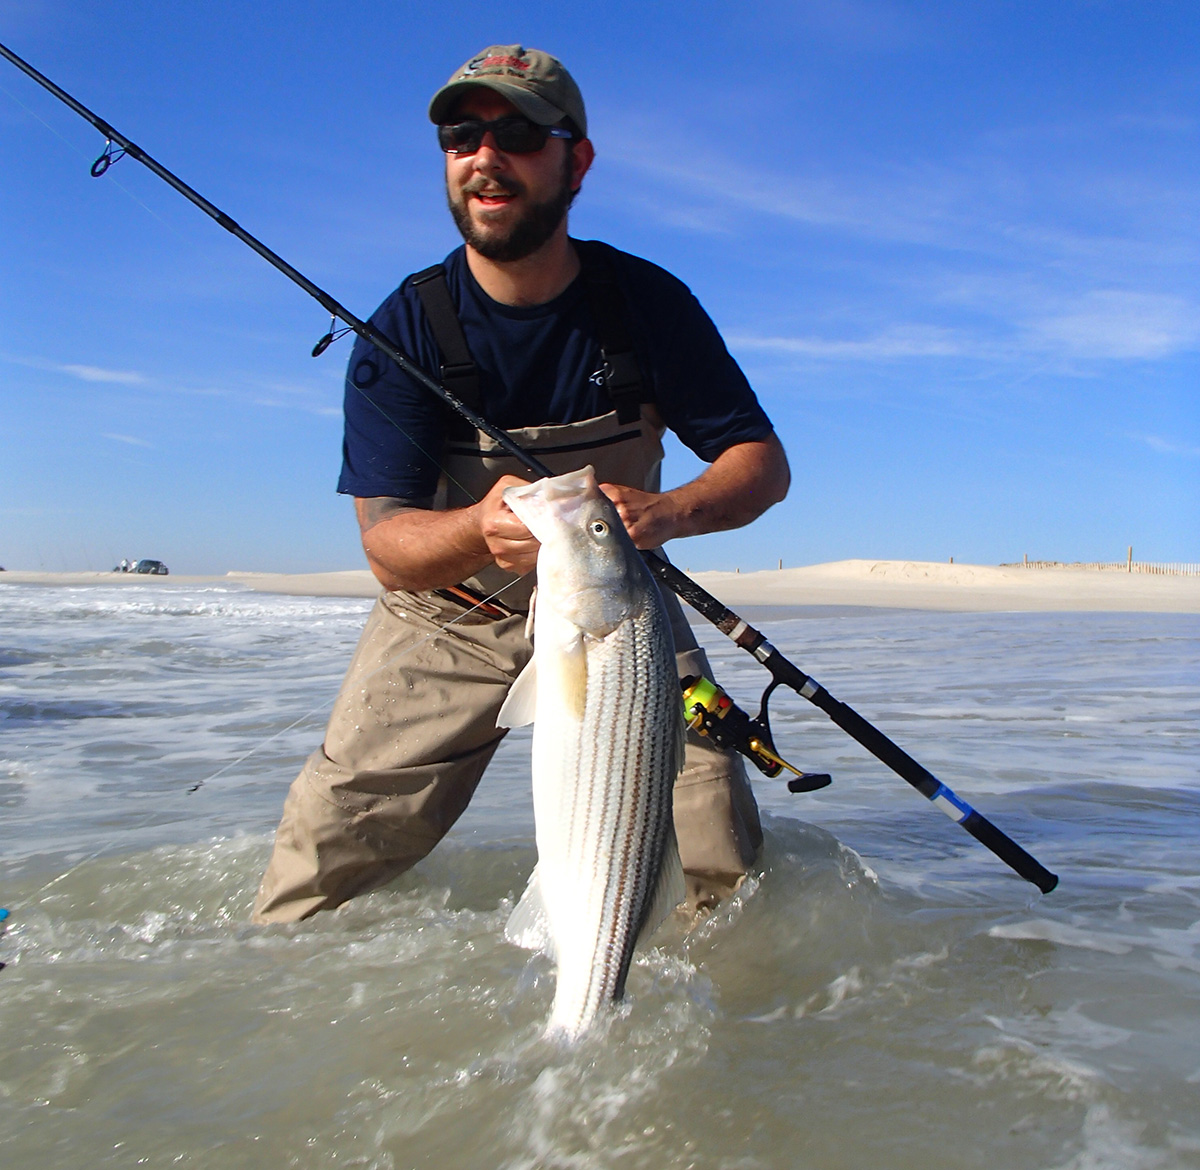 Striped Bass Surf Fishing Tackle